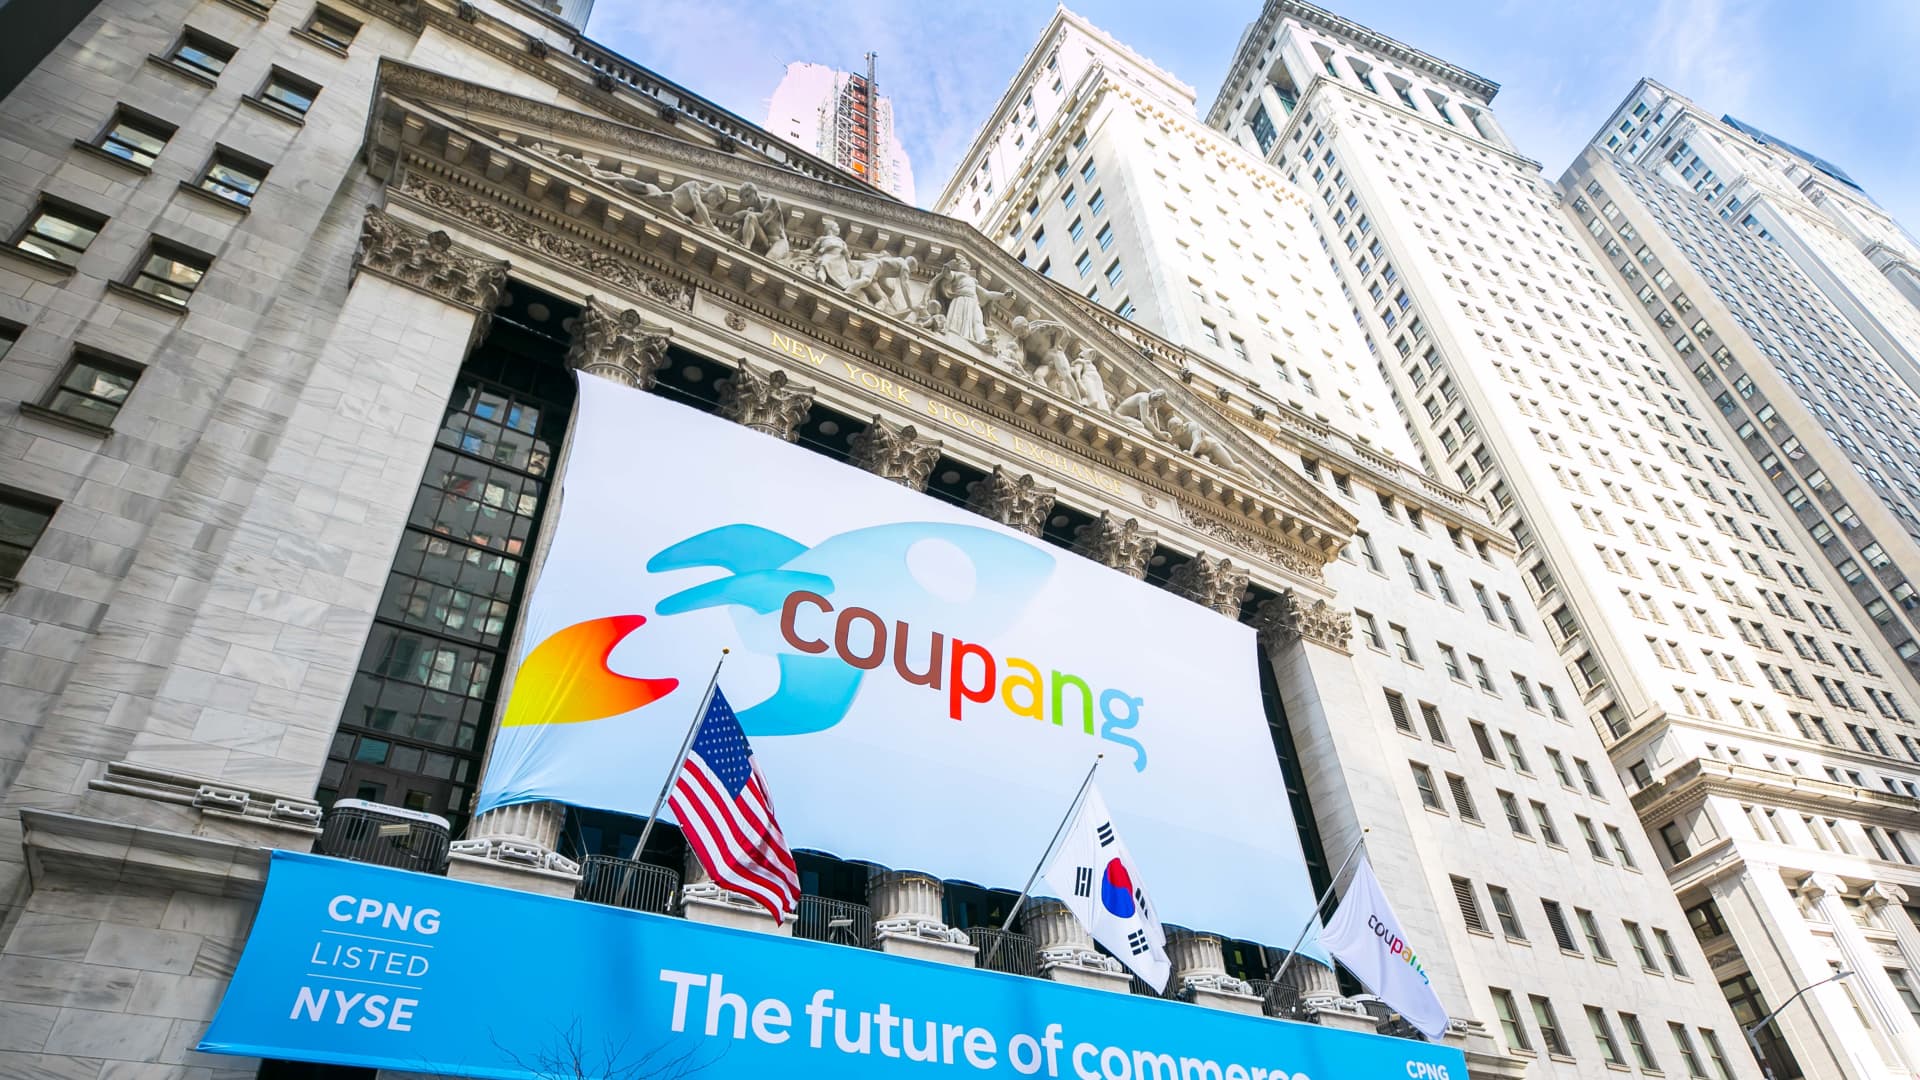 The New York Stock Exchange welcomes executives and guests of Coupang (NYSE: CPNG), today, Thursday, March 11, 2021, in celebration of its Initial Public Offering.